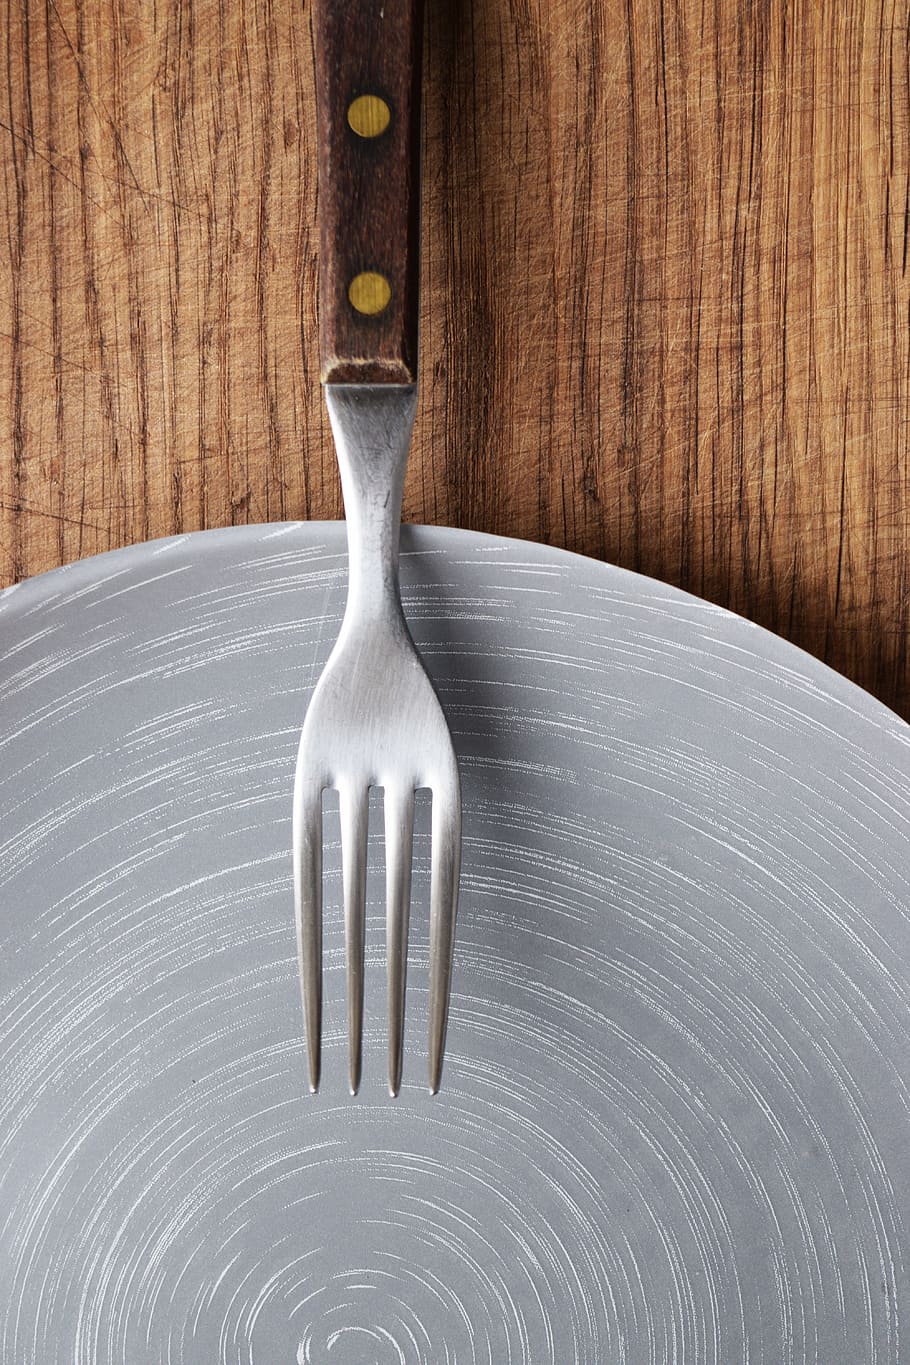 stainless, steel fork, brown, handle, fork, plate, dish, menu design, cutting board, wooden